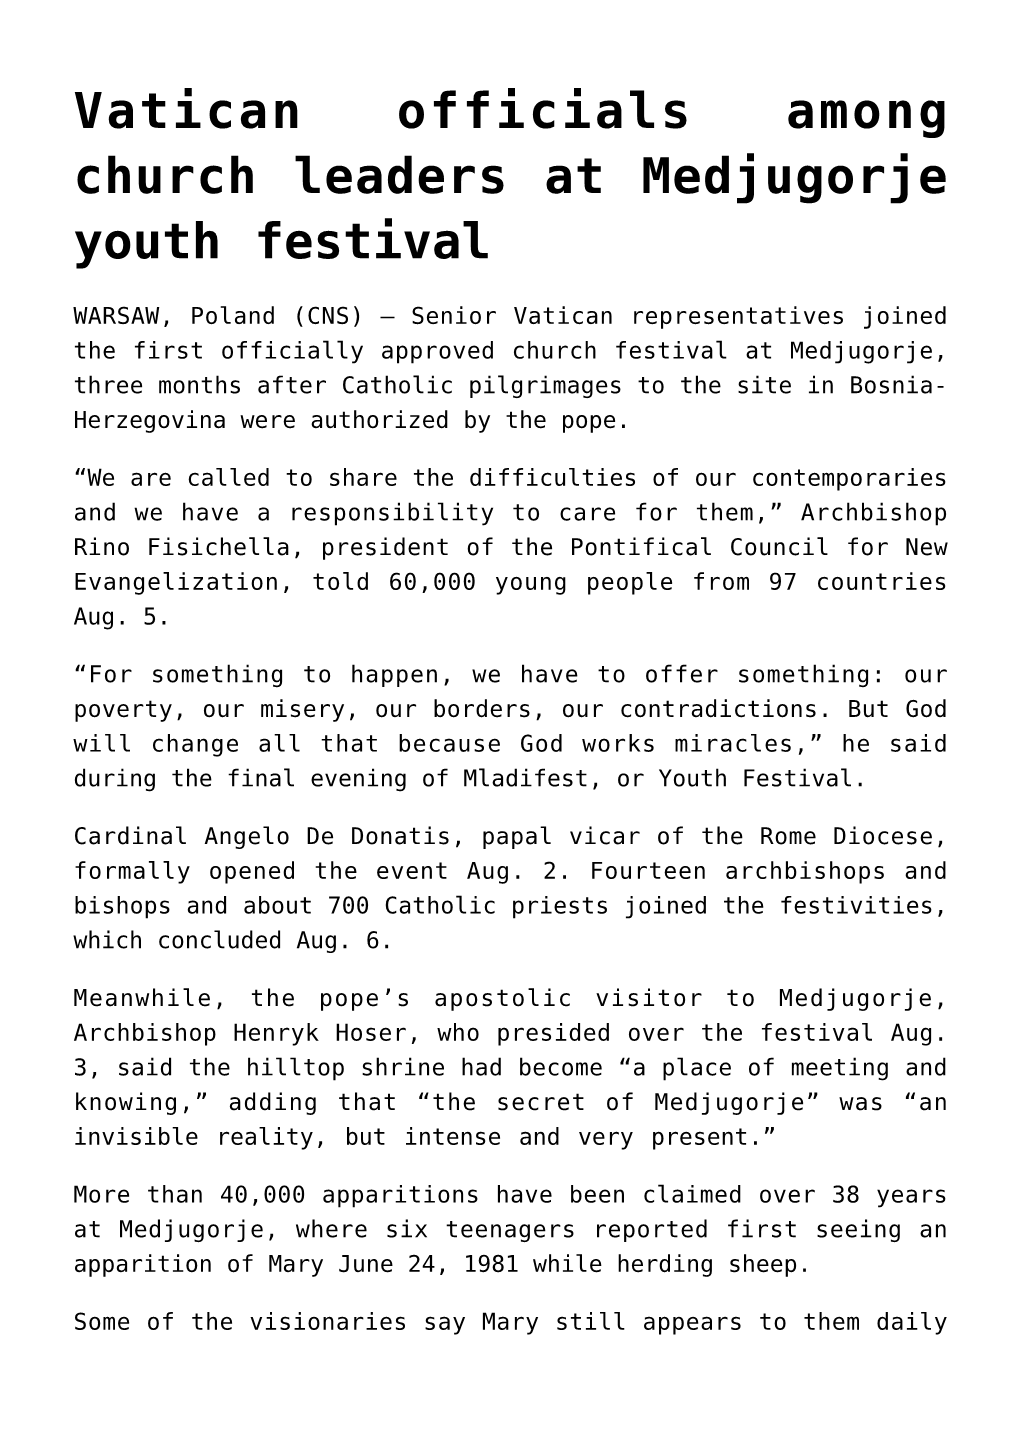 Vatican Officials Among Church Leaders at Medjugorje Youth Festival